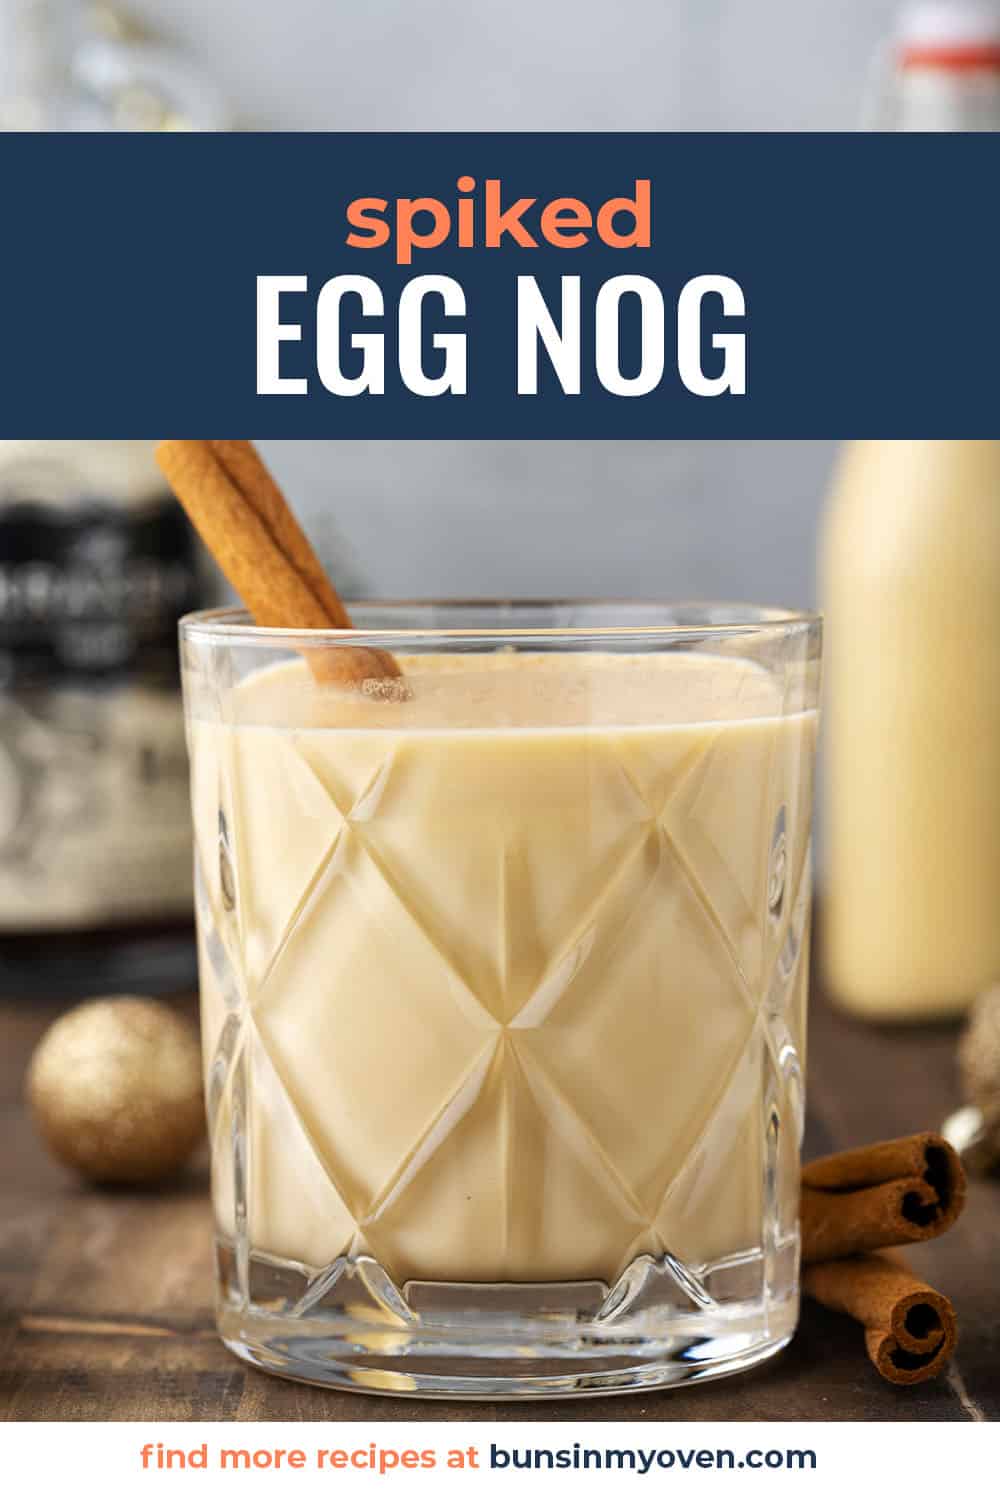 spiked eggnog in glass with text for Pinterest.